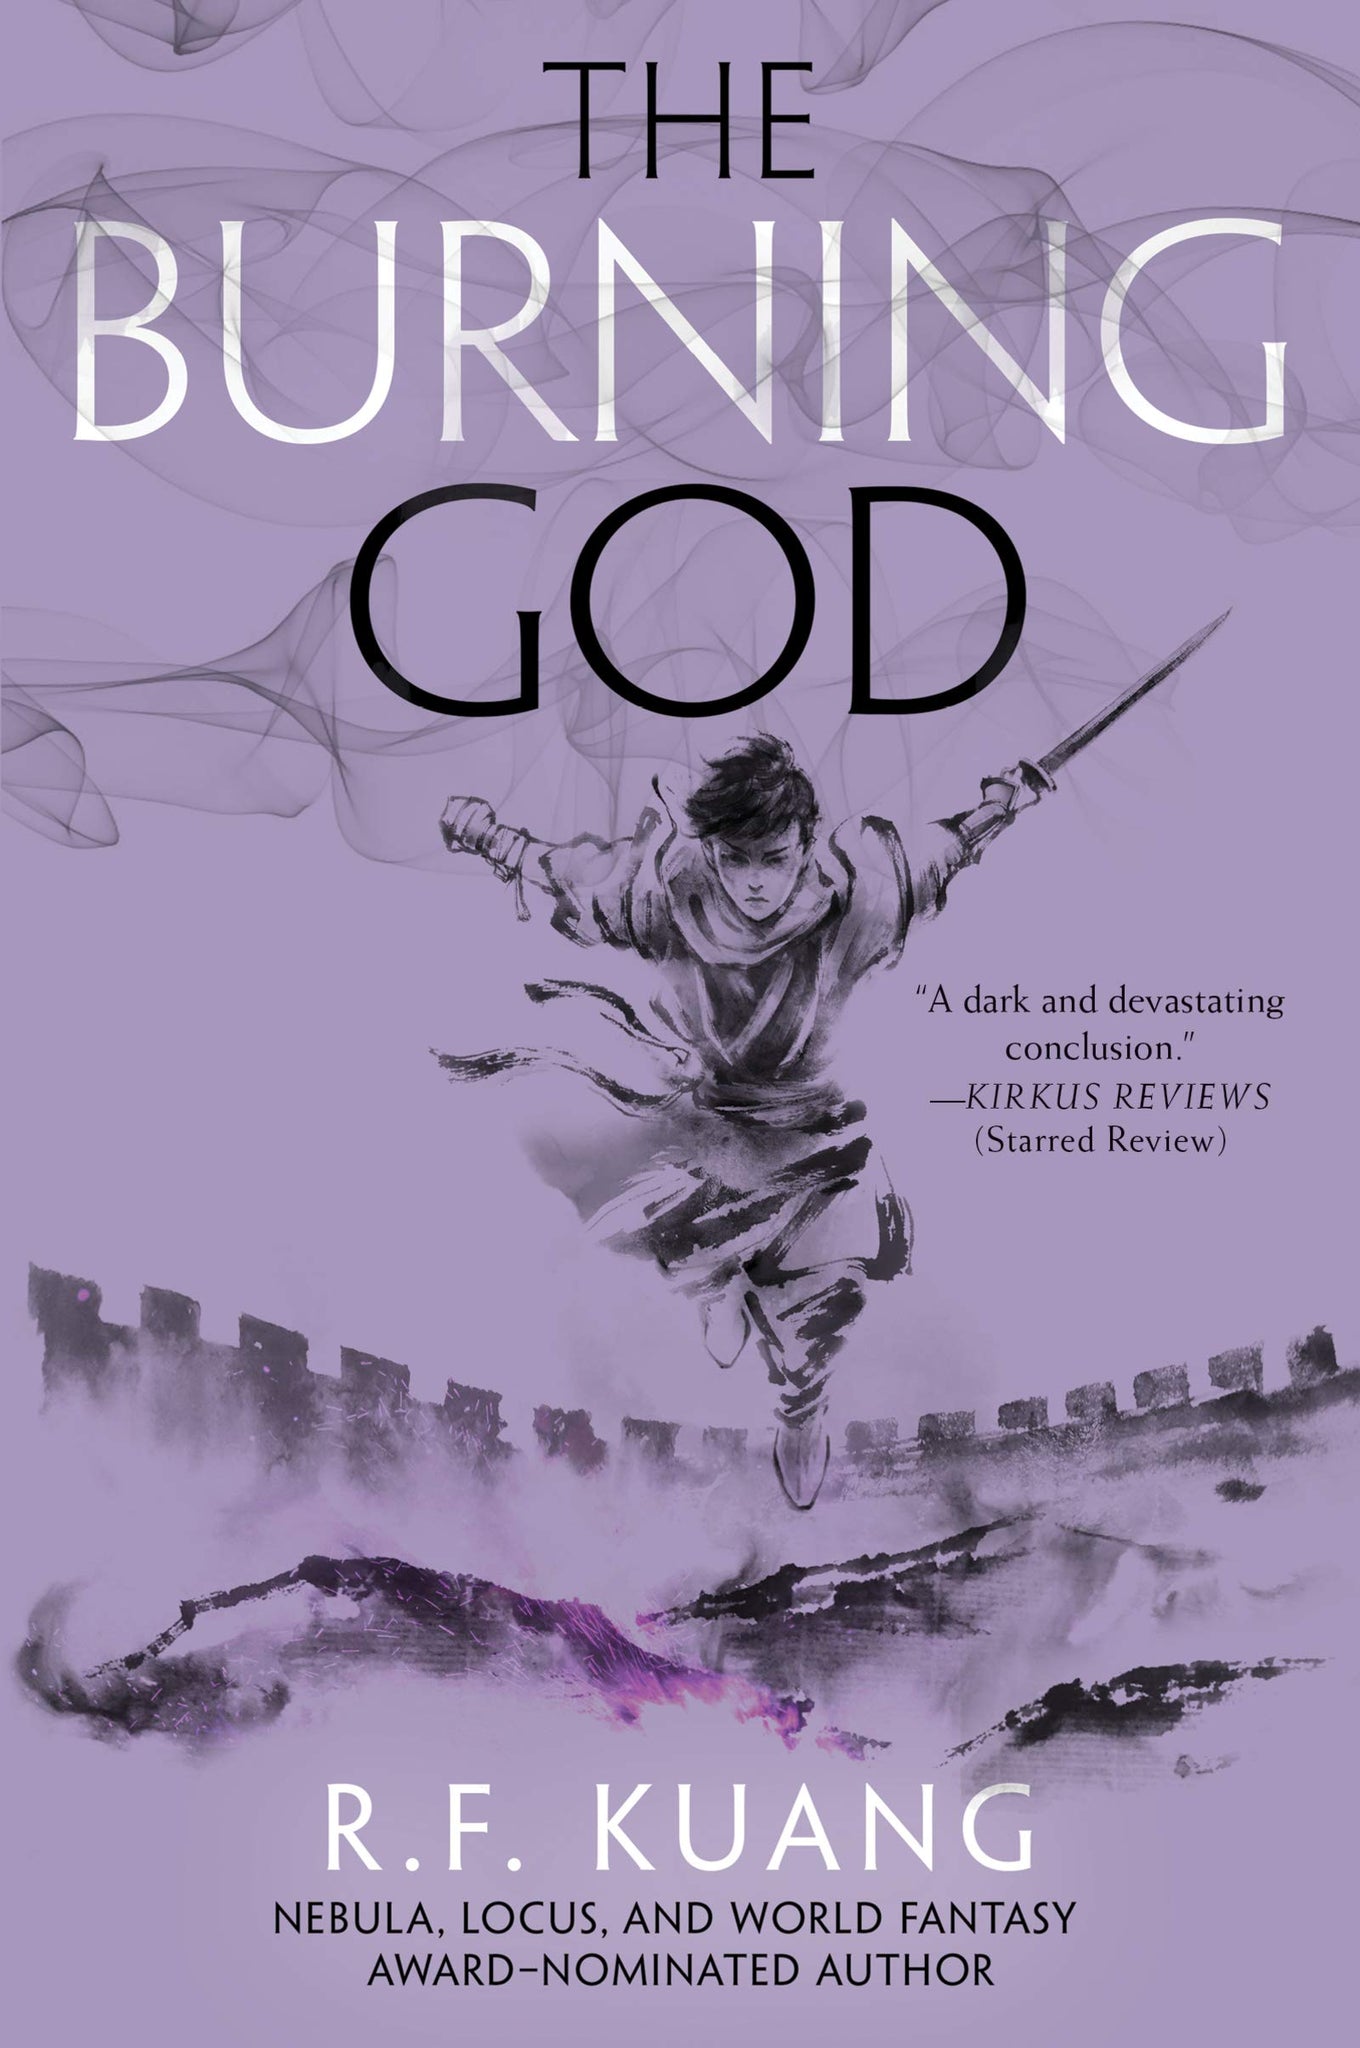 Poppy War #3 : The Burning God by R F Kuang